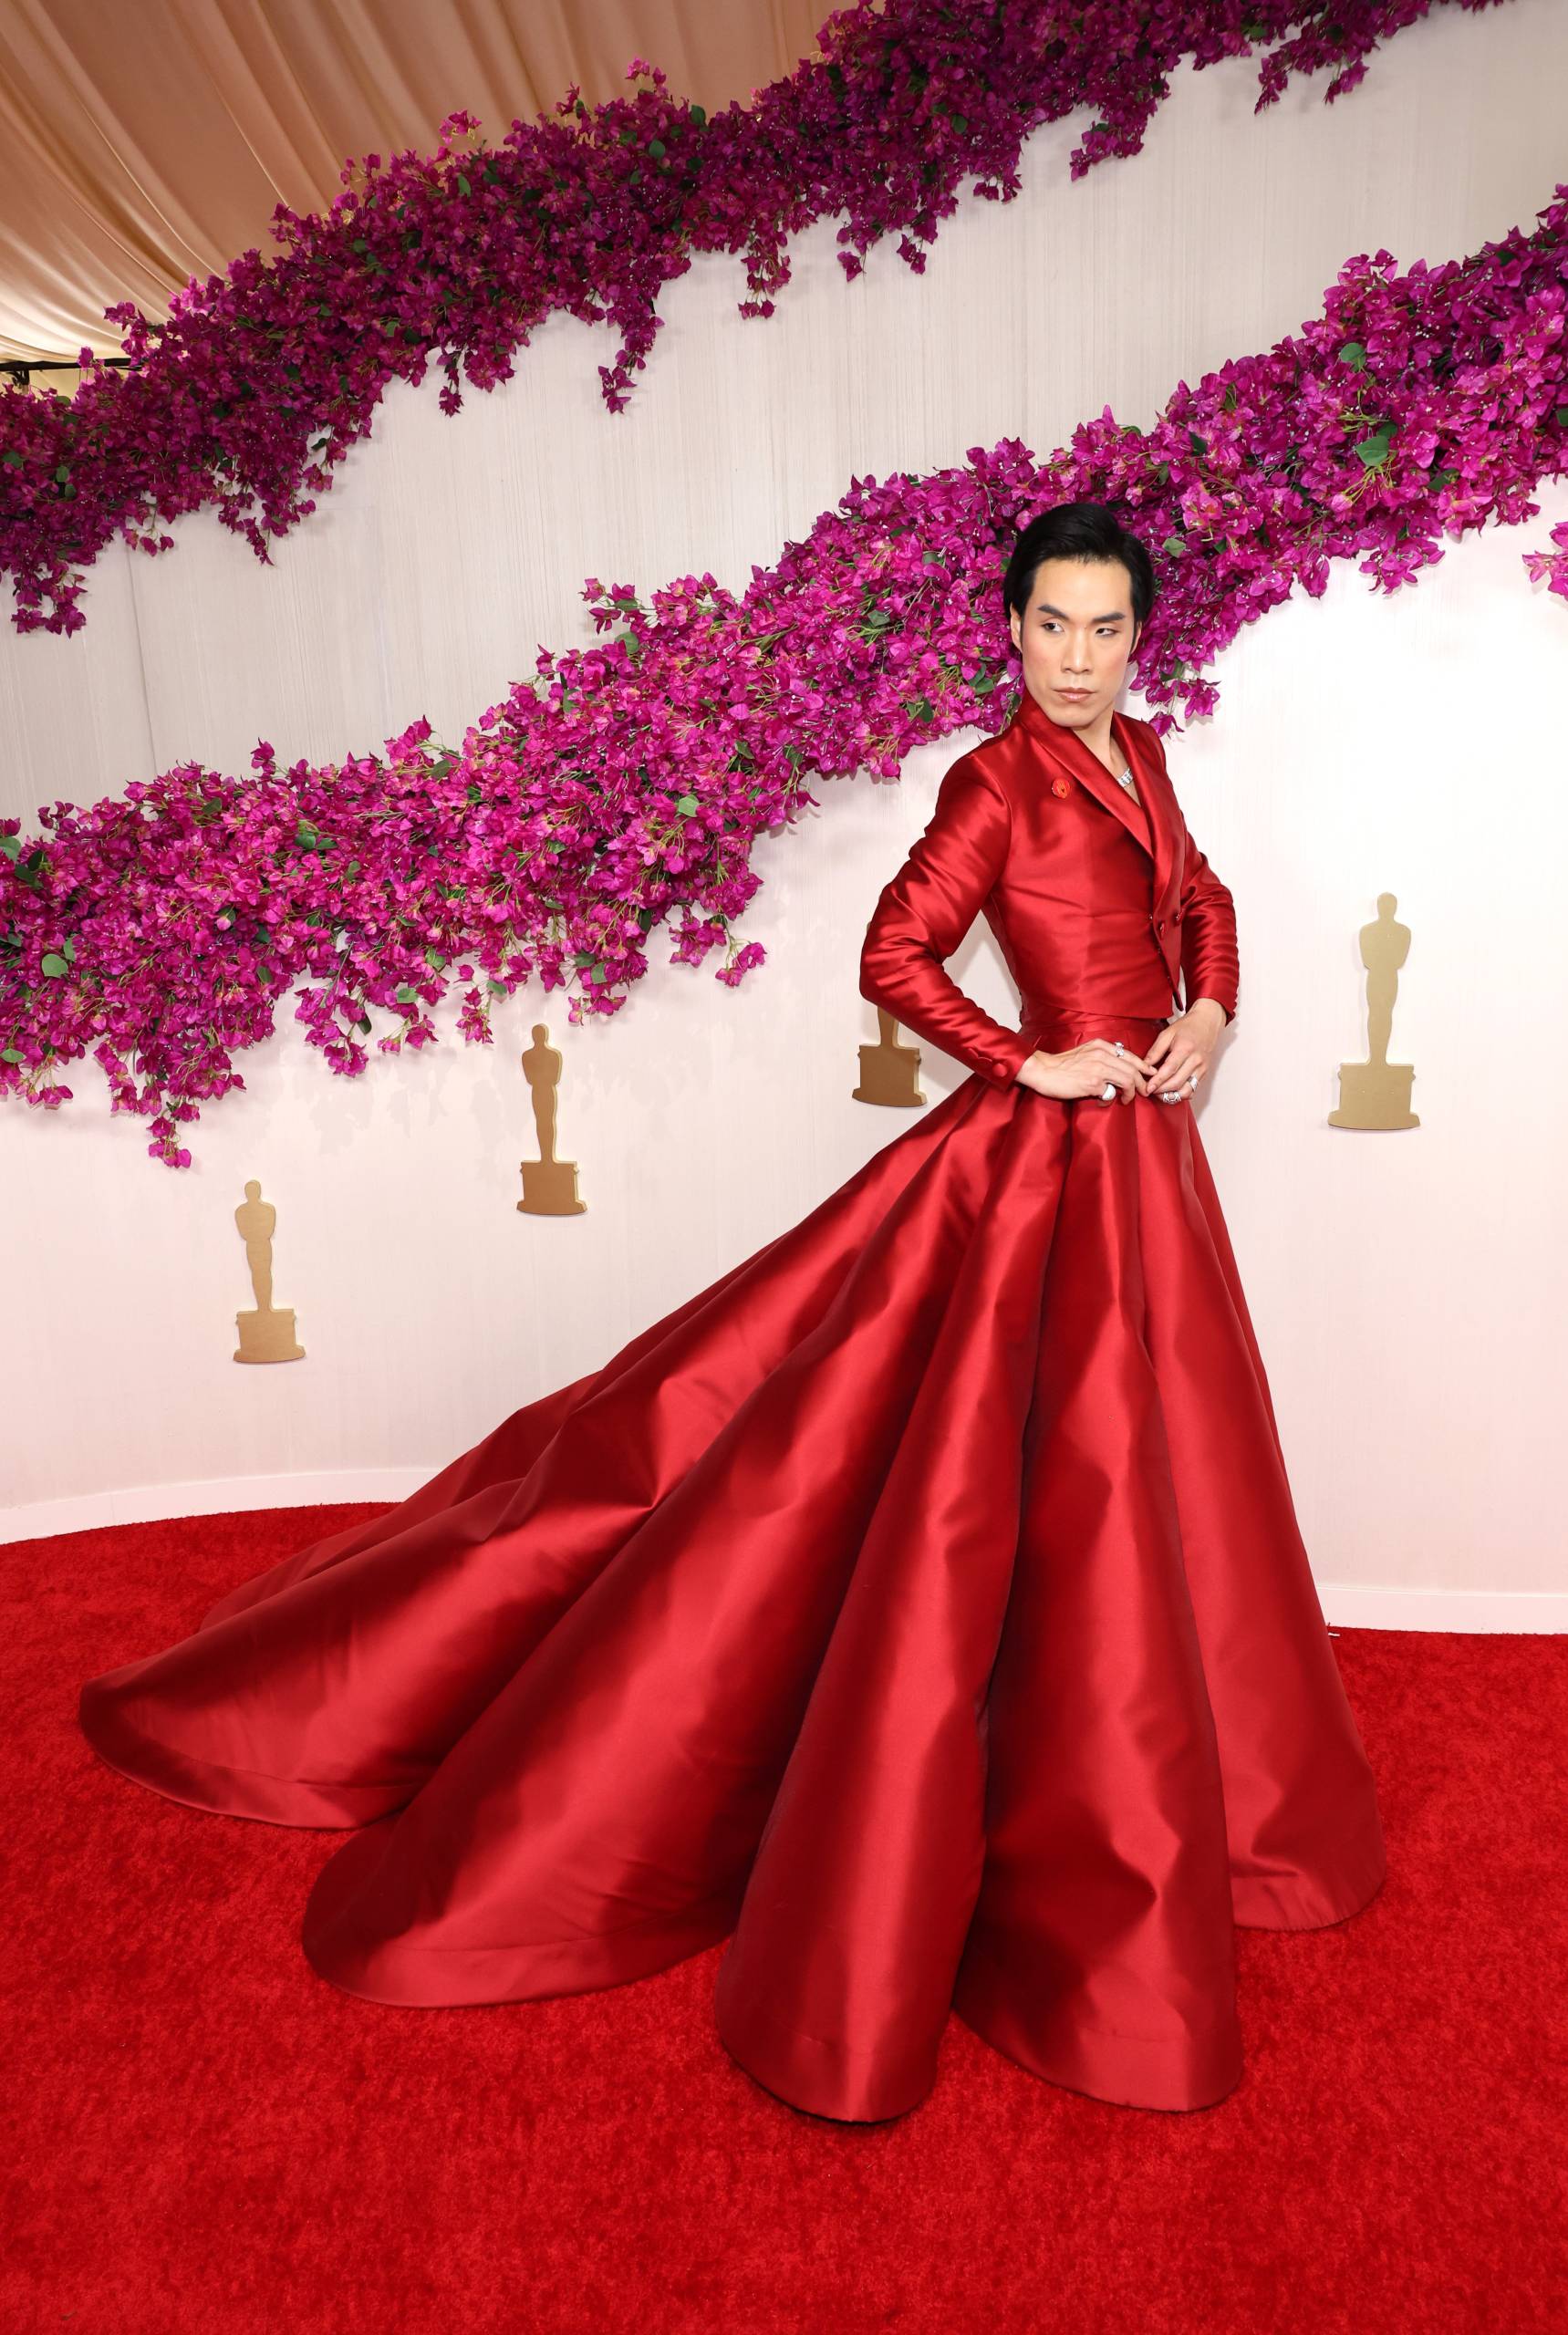 A striking Asian person with dark hair poses, hands on hips, in a red gown with very large skirts.